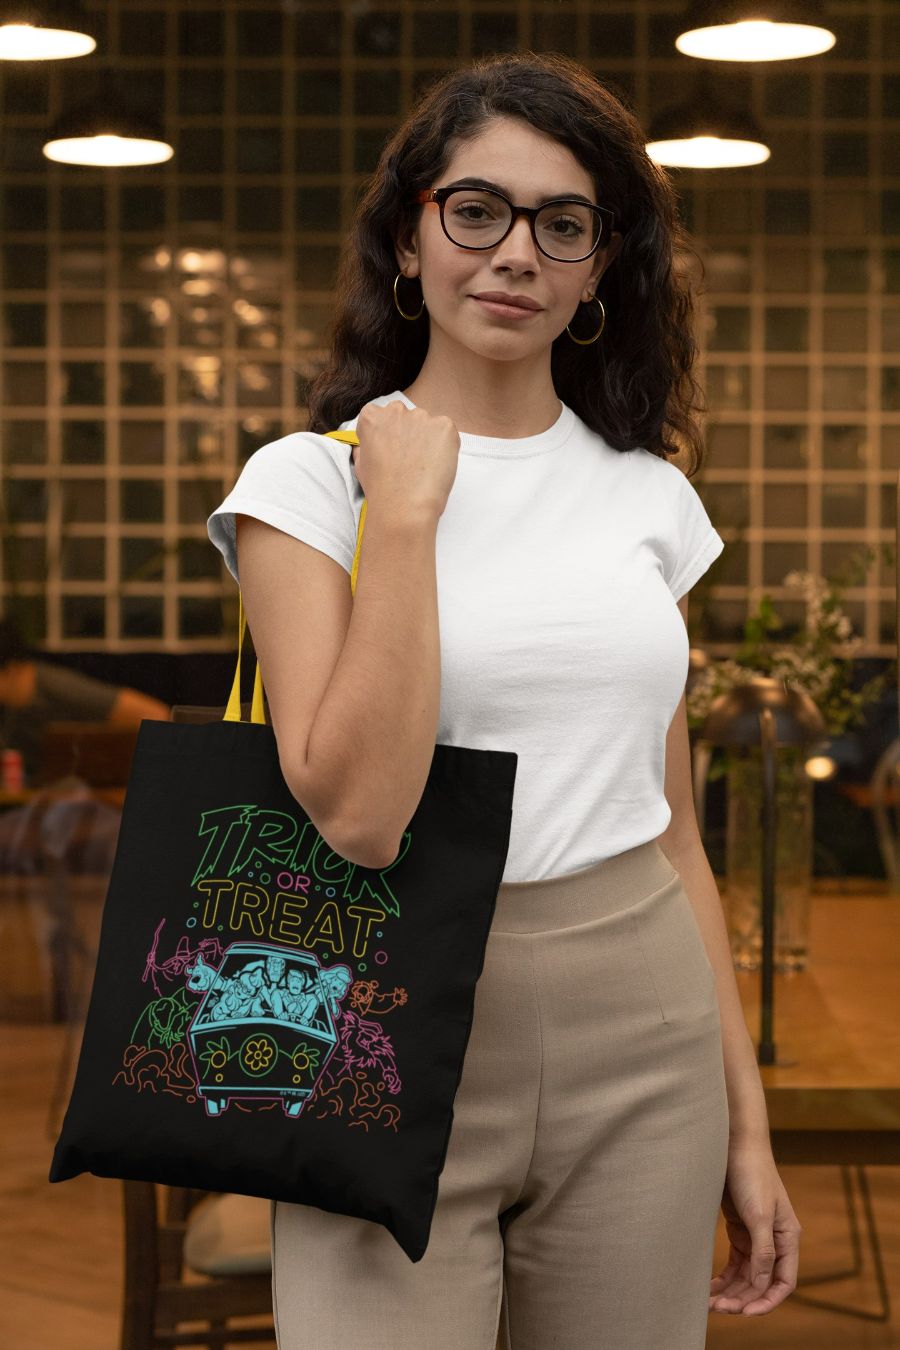 SD-Scoobtober_t-shirt-mockup-featuring-a-woman-carrying-a-tote-bag-29415